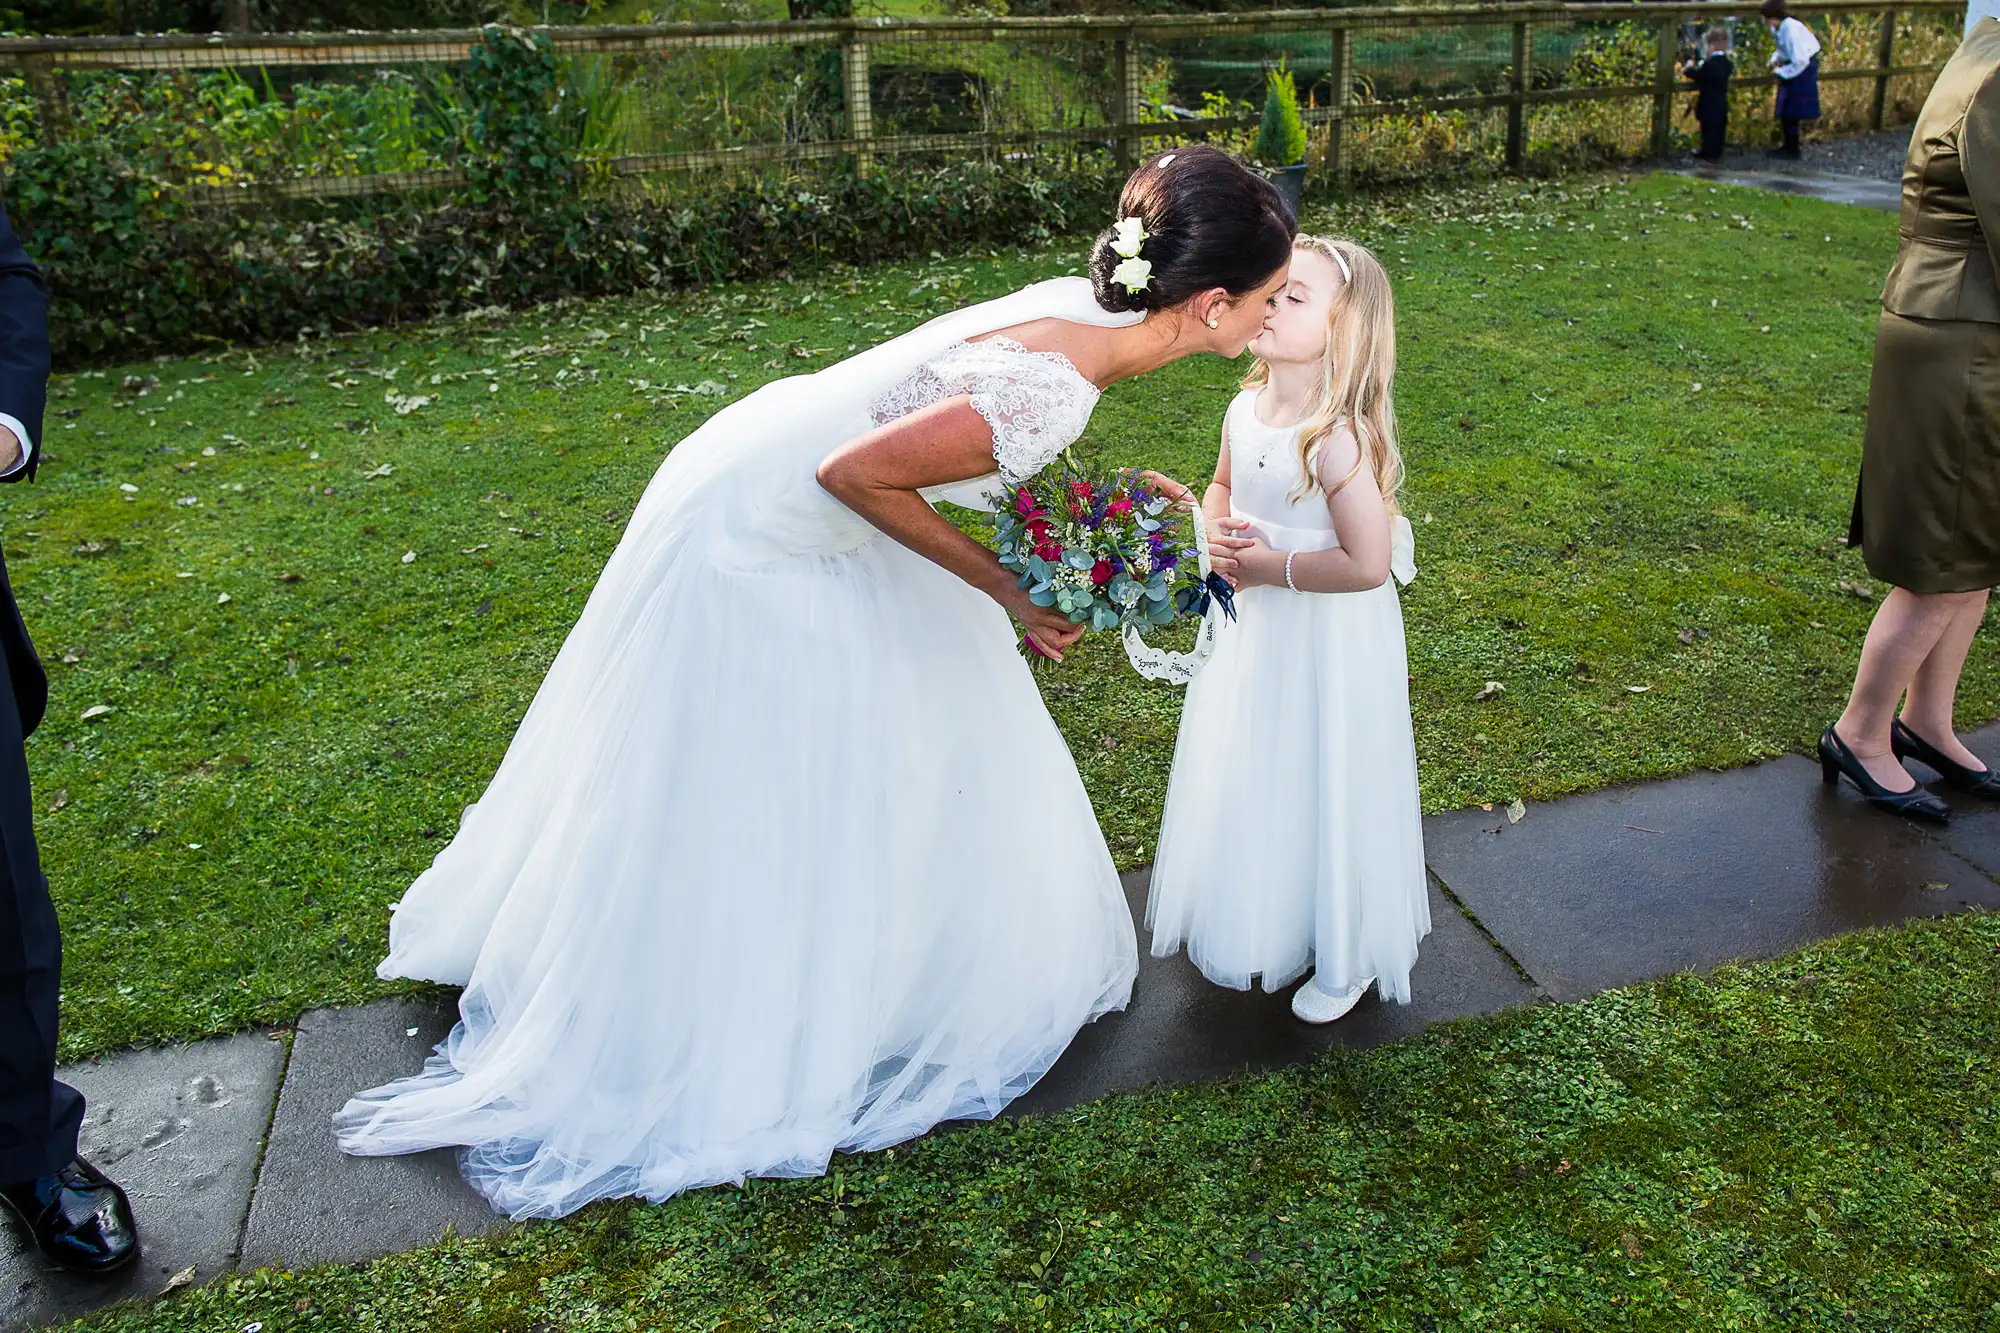 A bride in a white gown kisses a young girl in a white dress holding a bouquet, outdoors on grass by a fence.